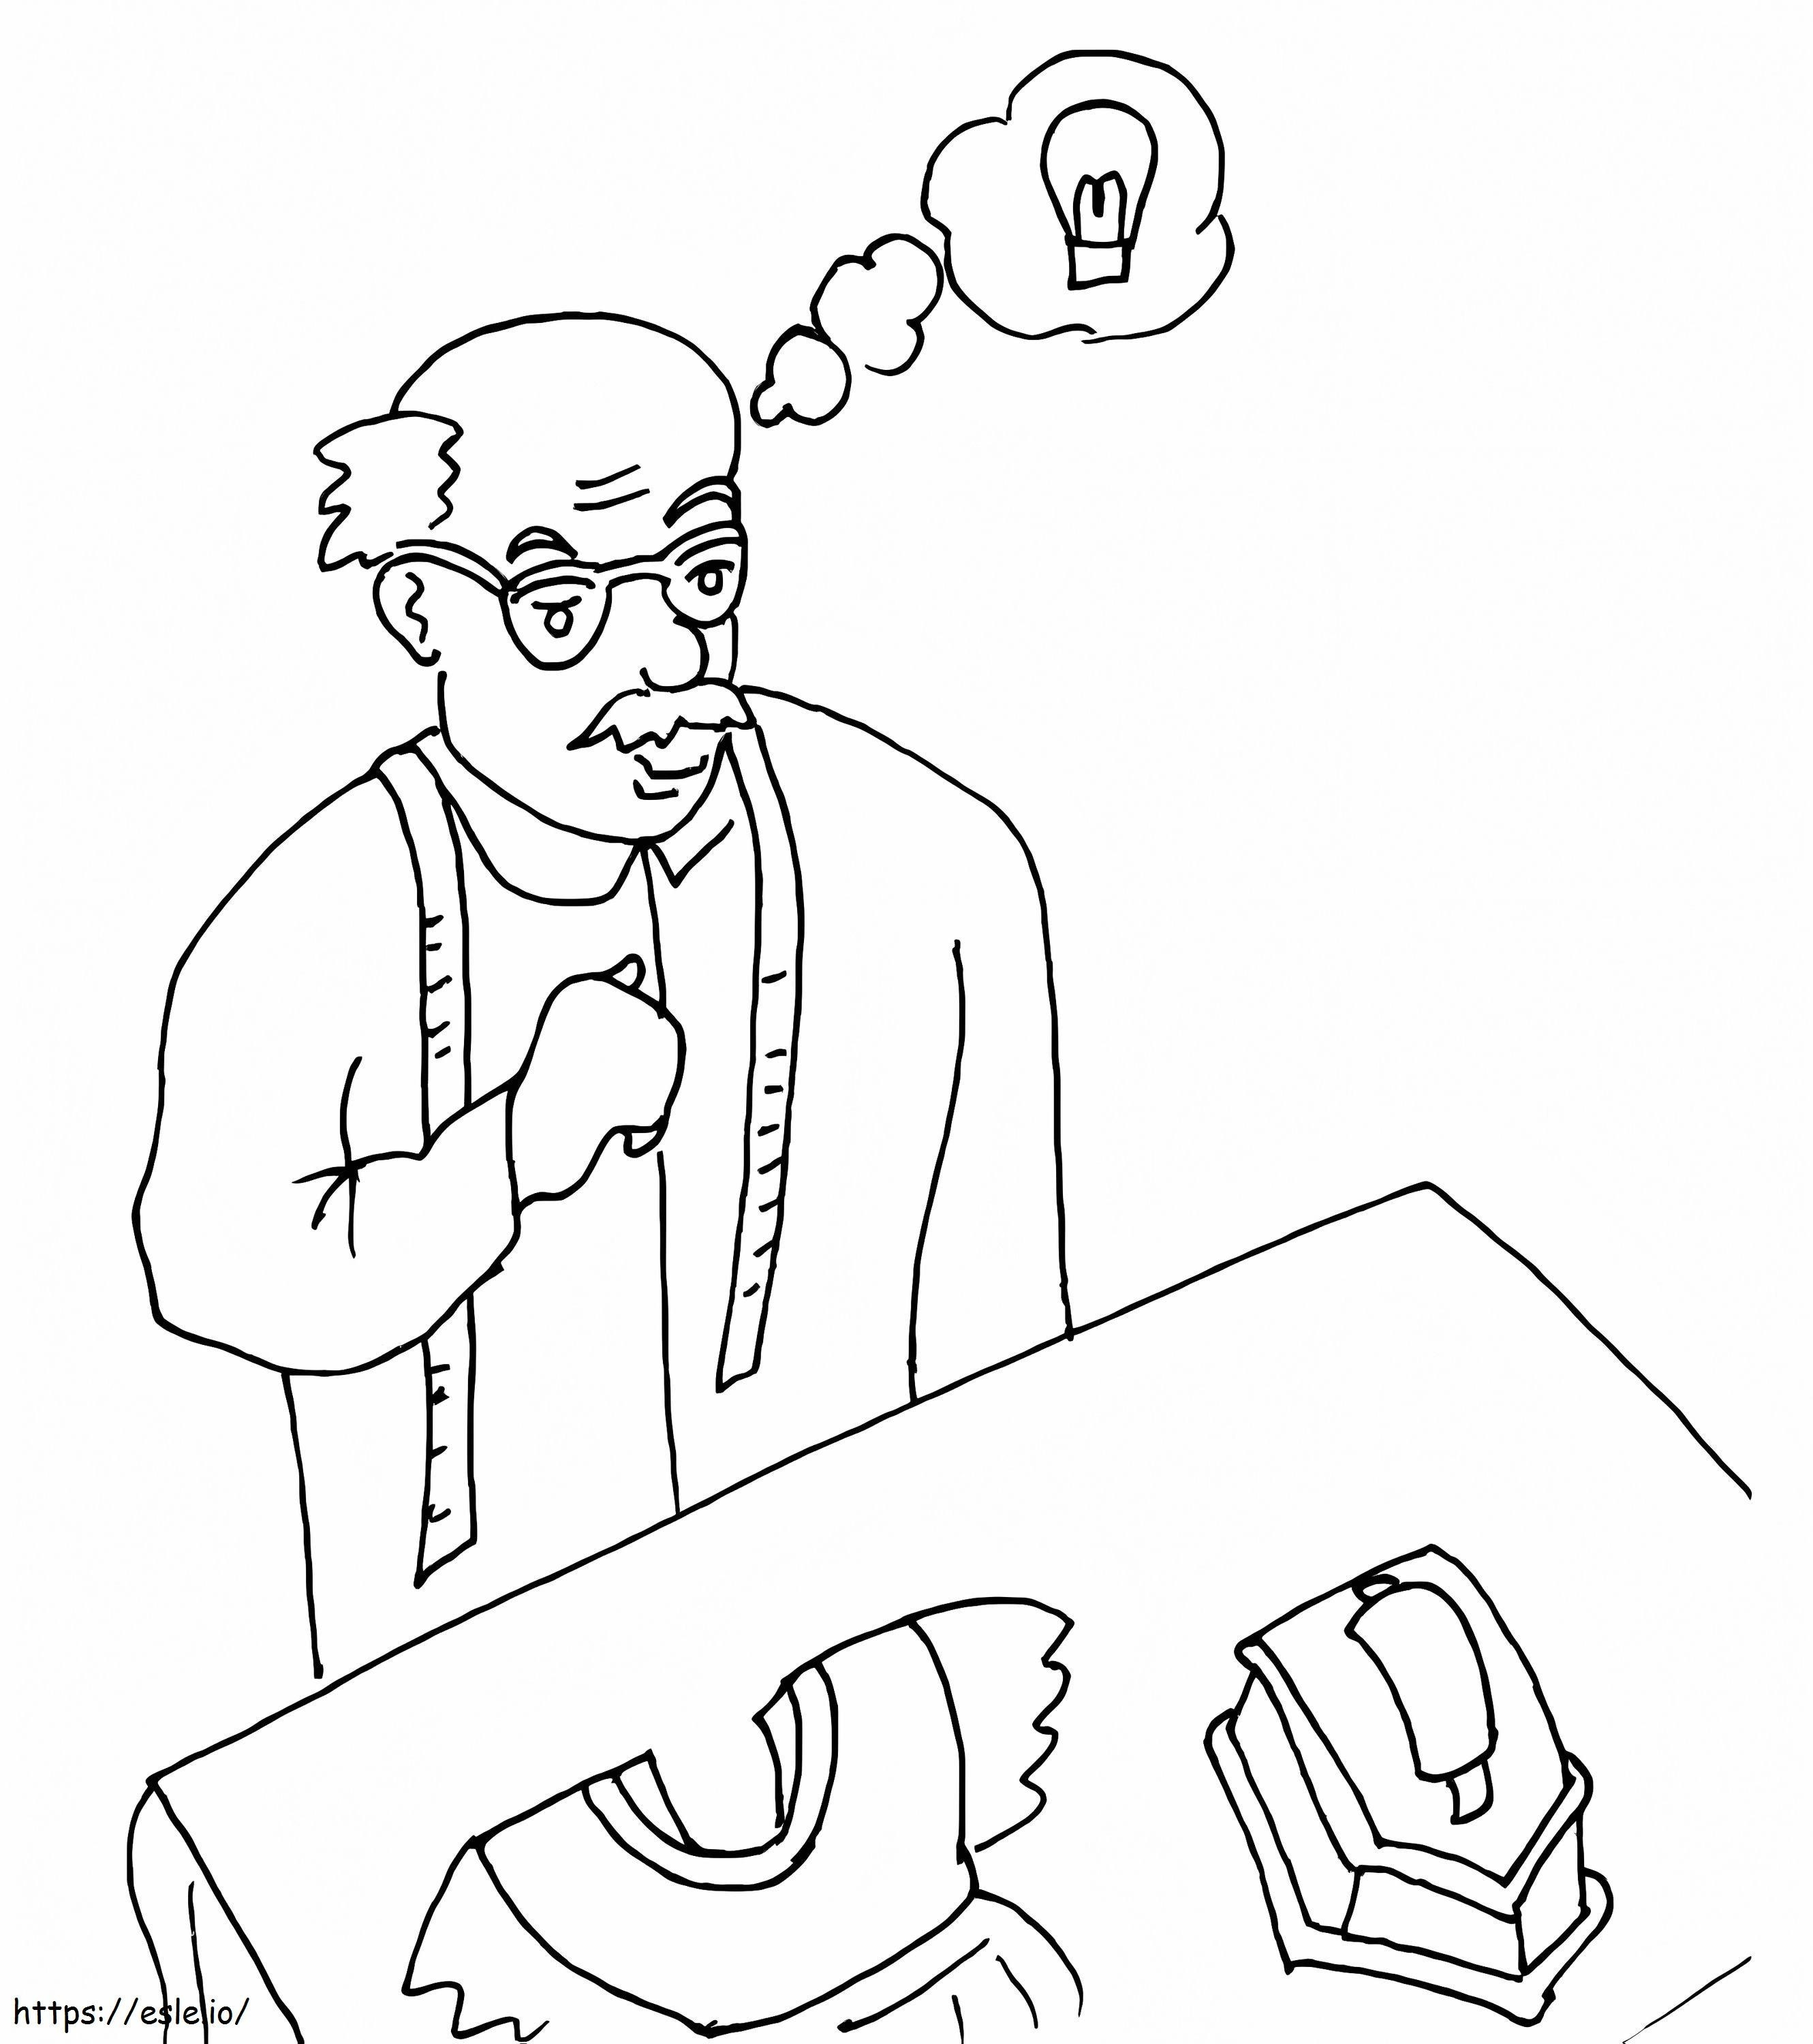 Old Tailor 2 coloring page